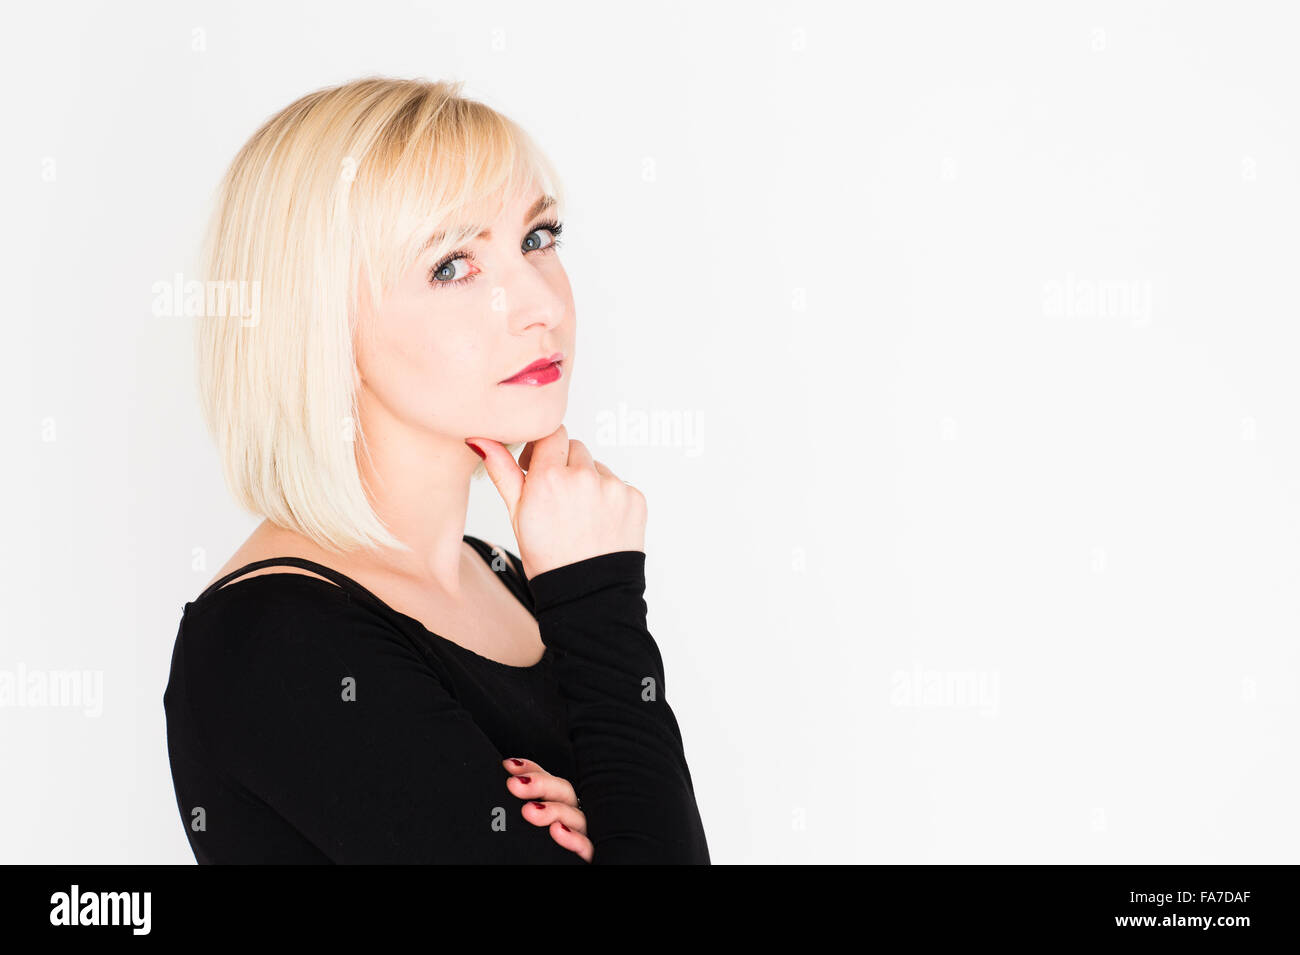 Decision making - difficult life choices and options : A young slim blonde blond haired woman girl, thinking, pondering, thoughtful,  UK Stock Photo